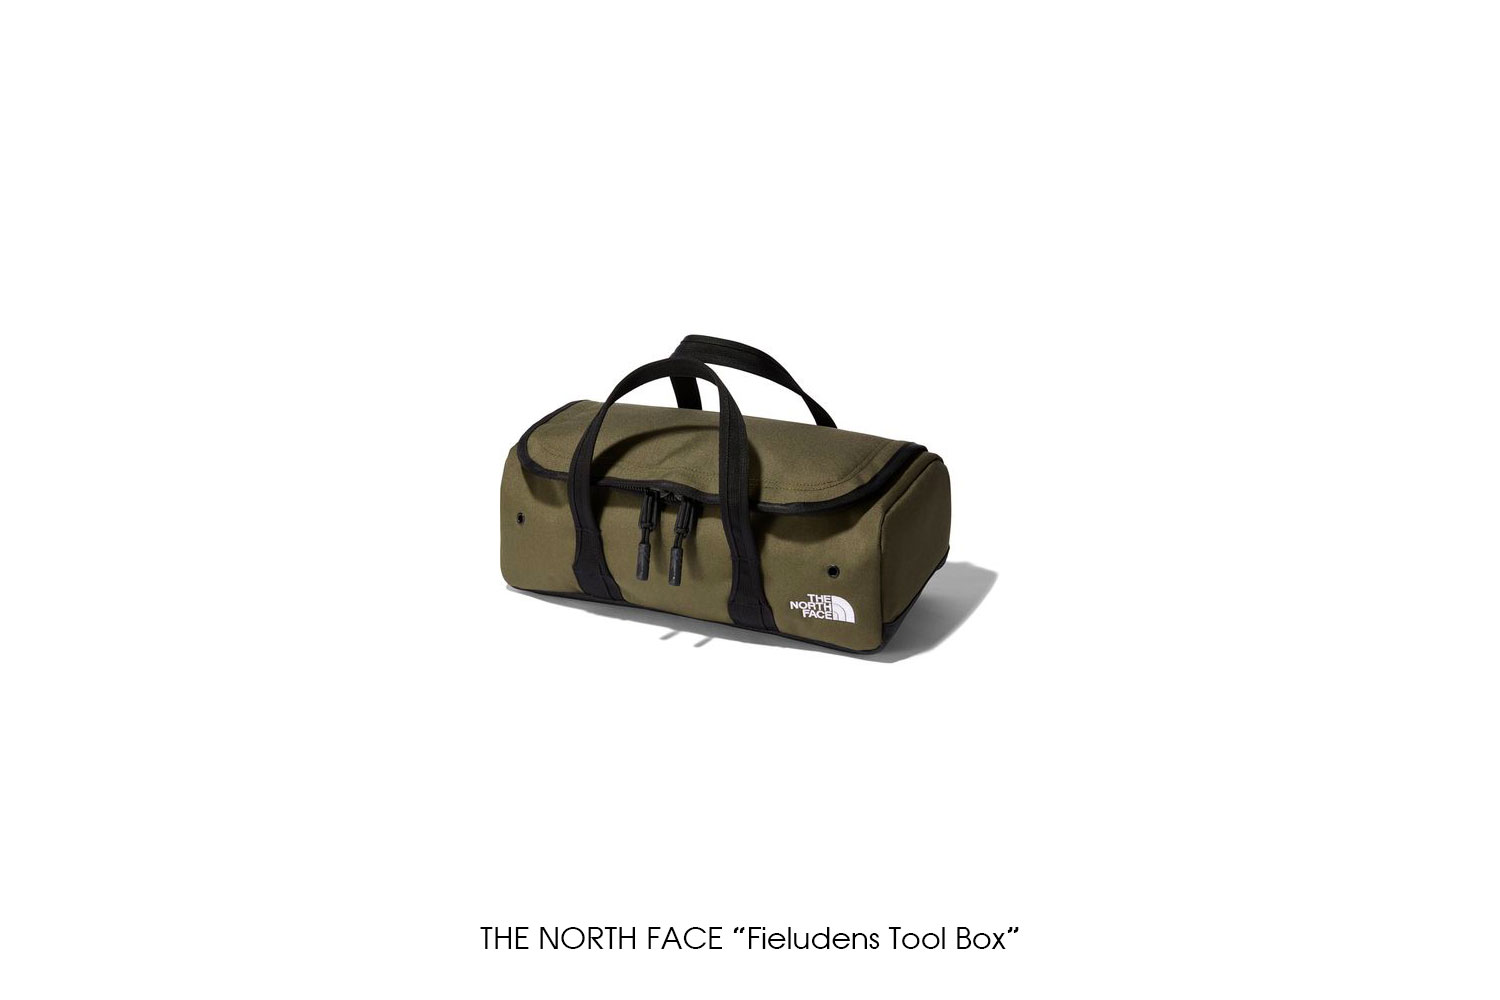 THE NORTH FACE "Fieludens Tool Box"